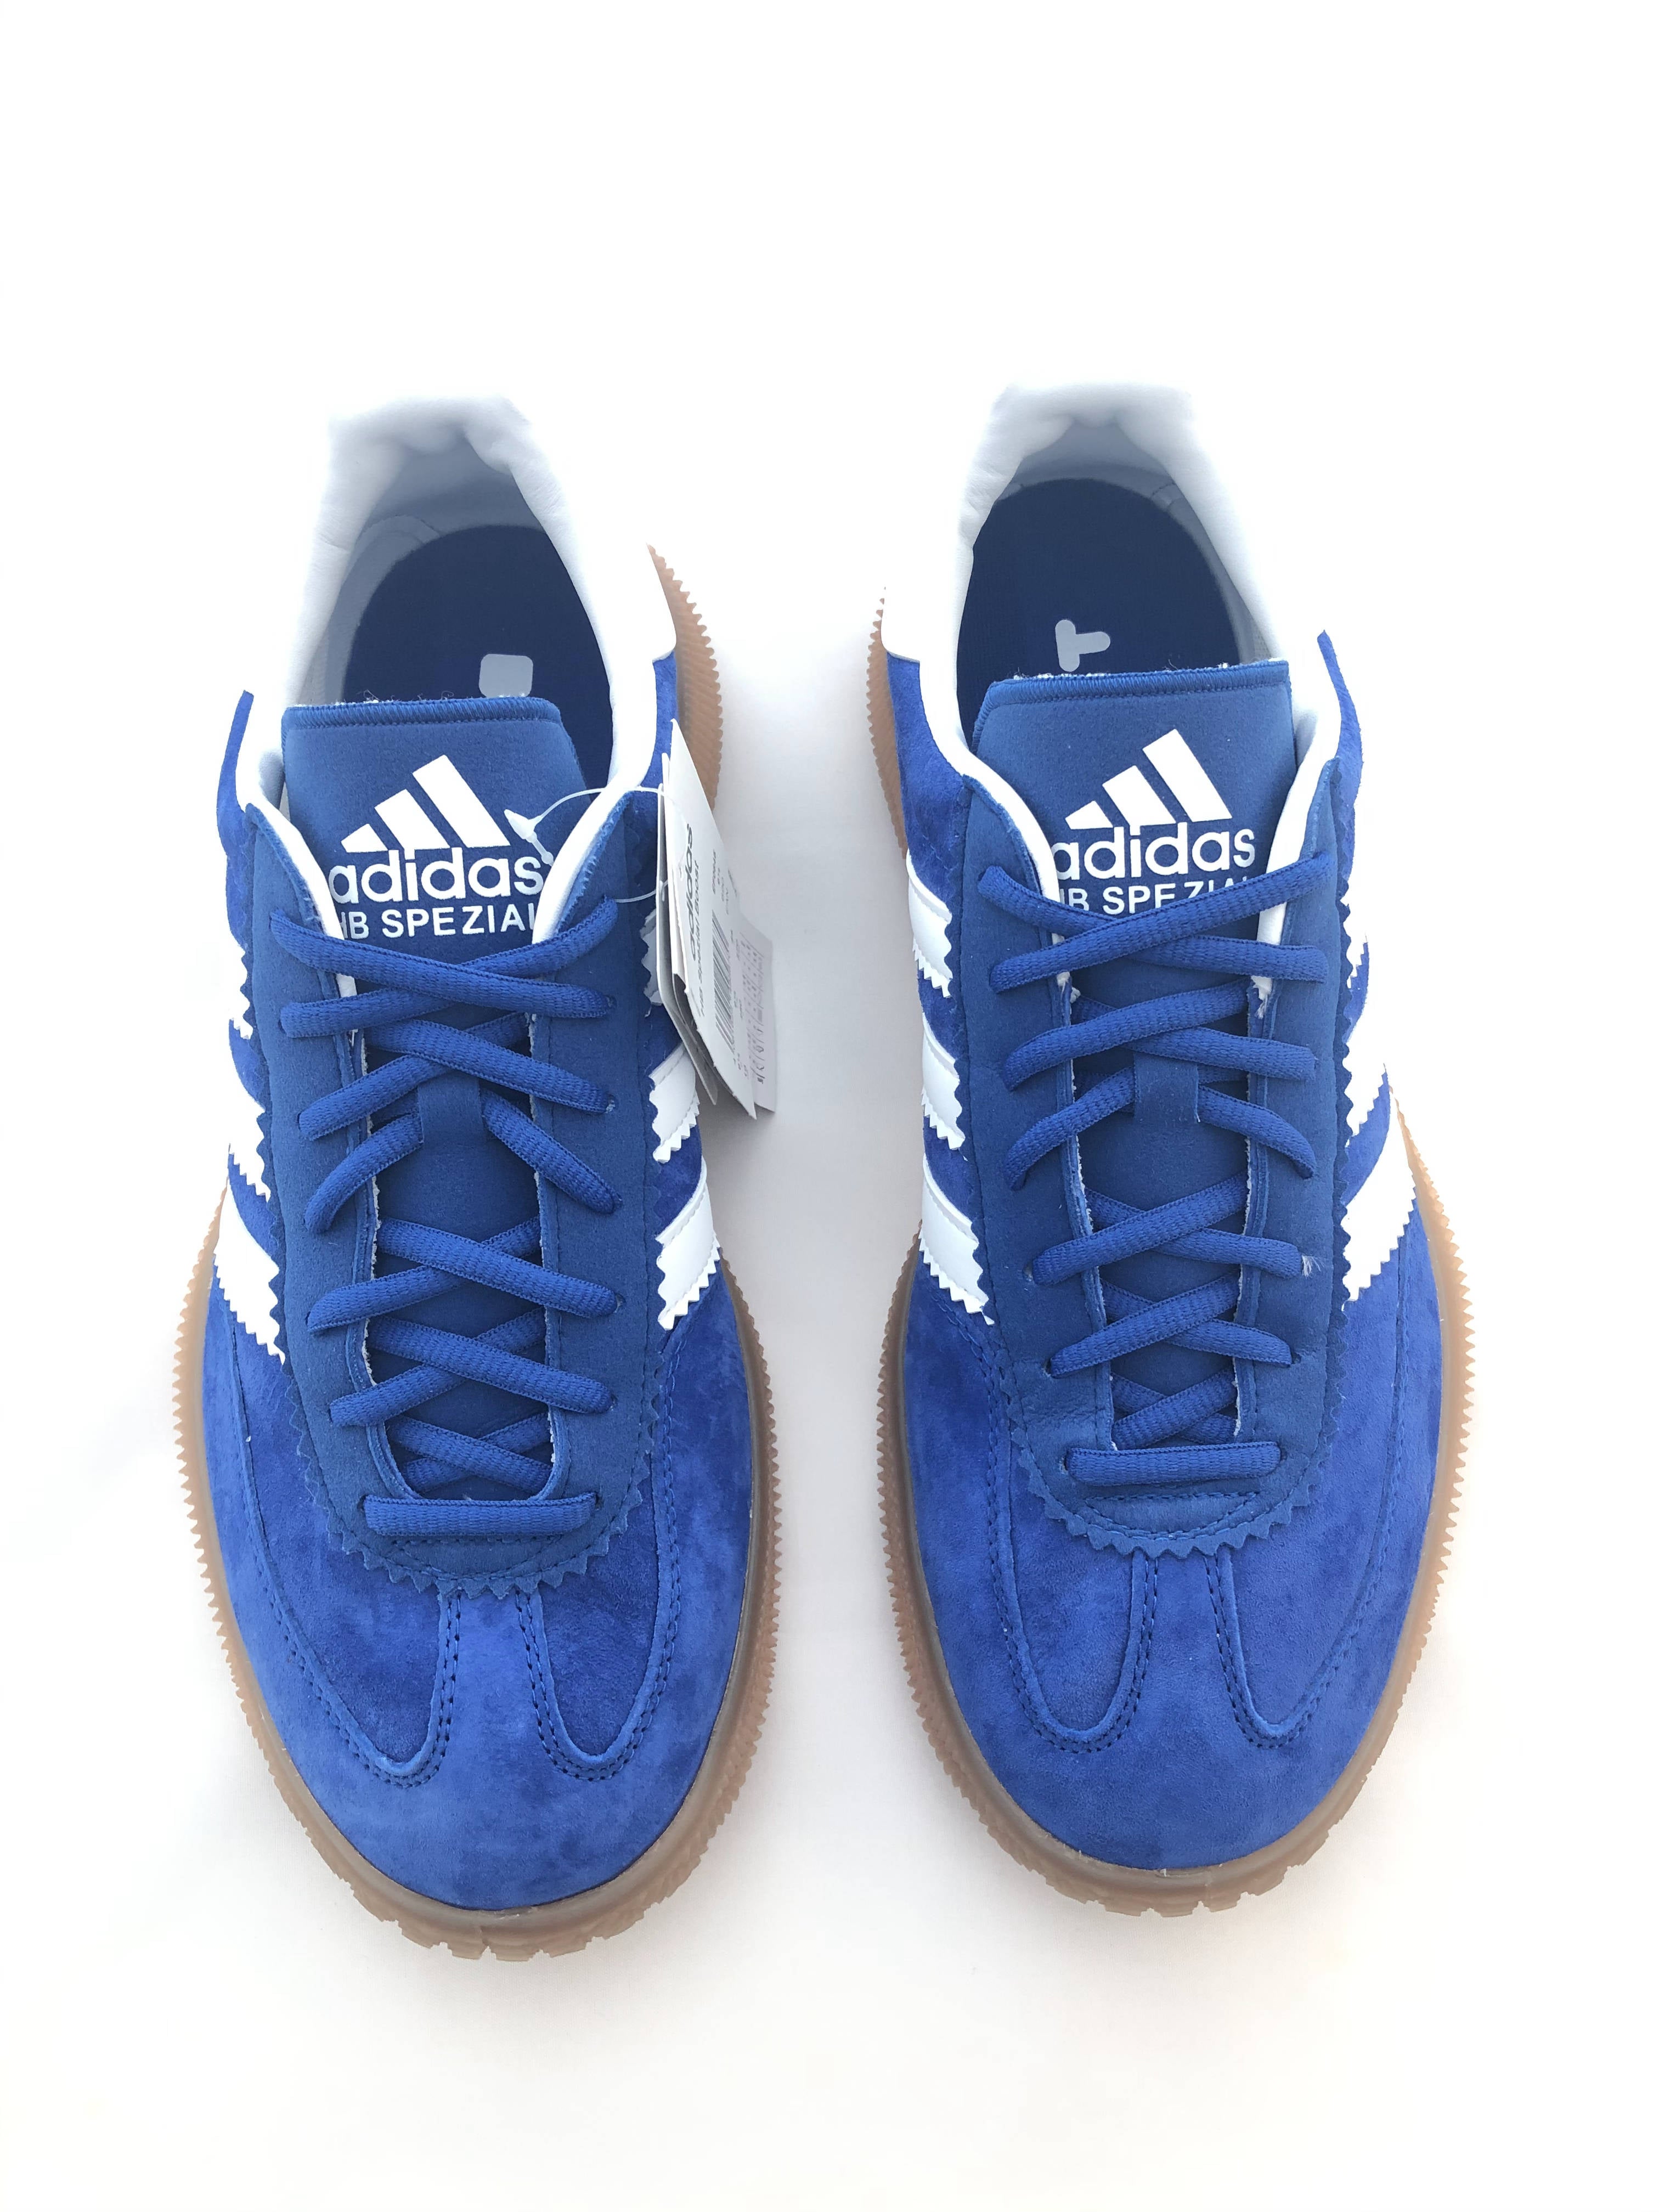 intentional Imminent education ADIDAS HB SPEZIAL BOOST – Sportykong